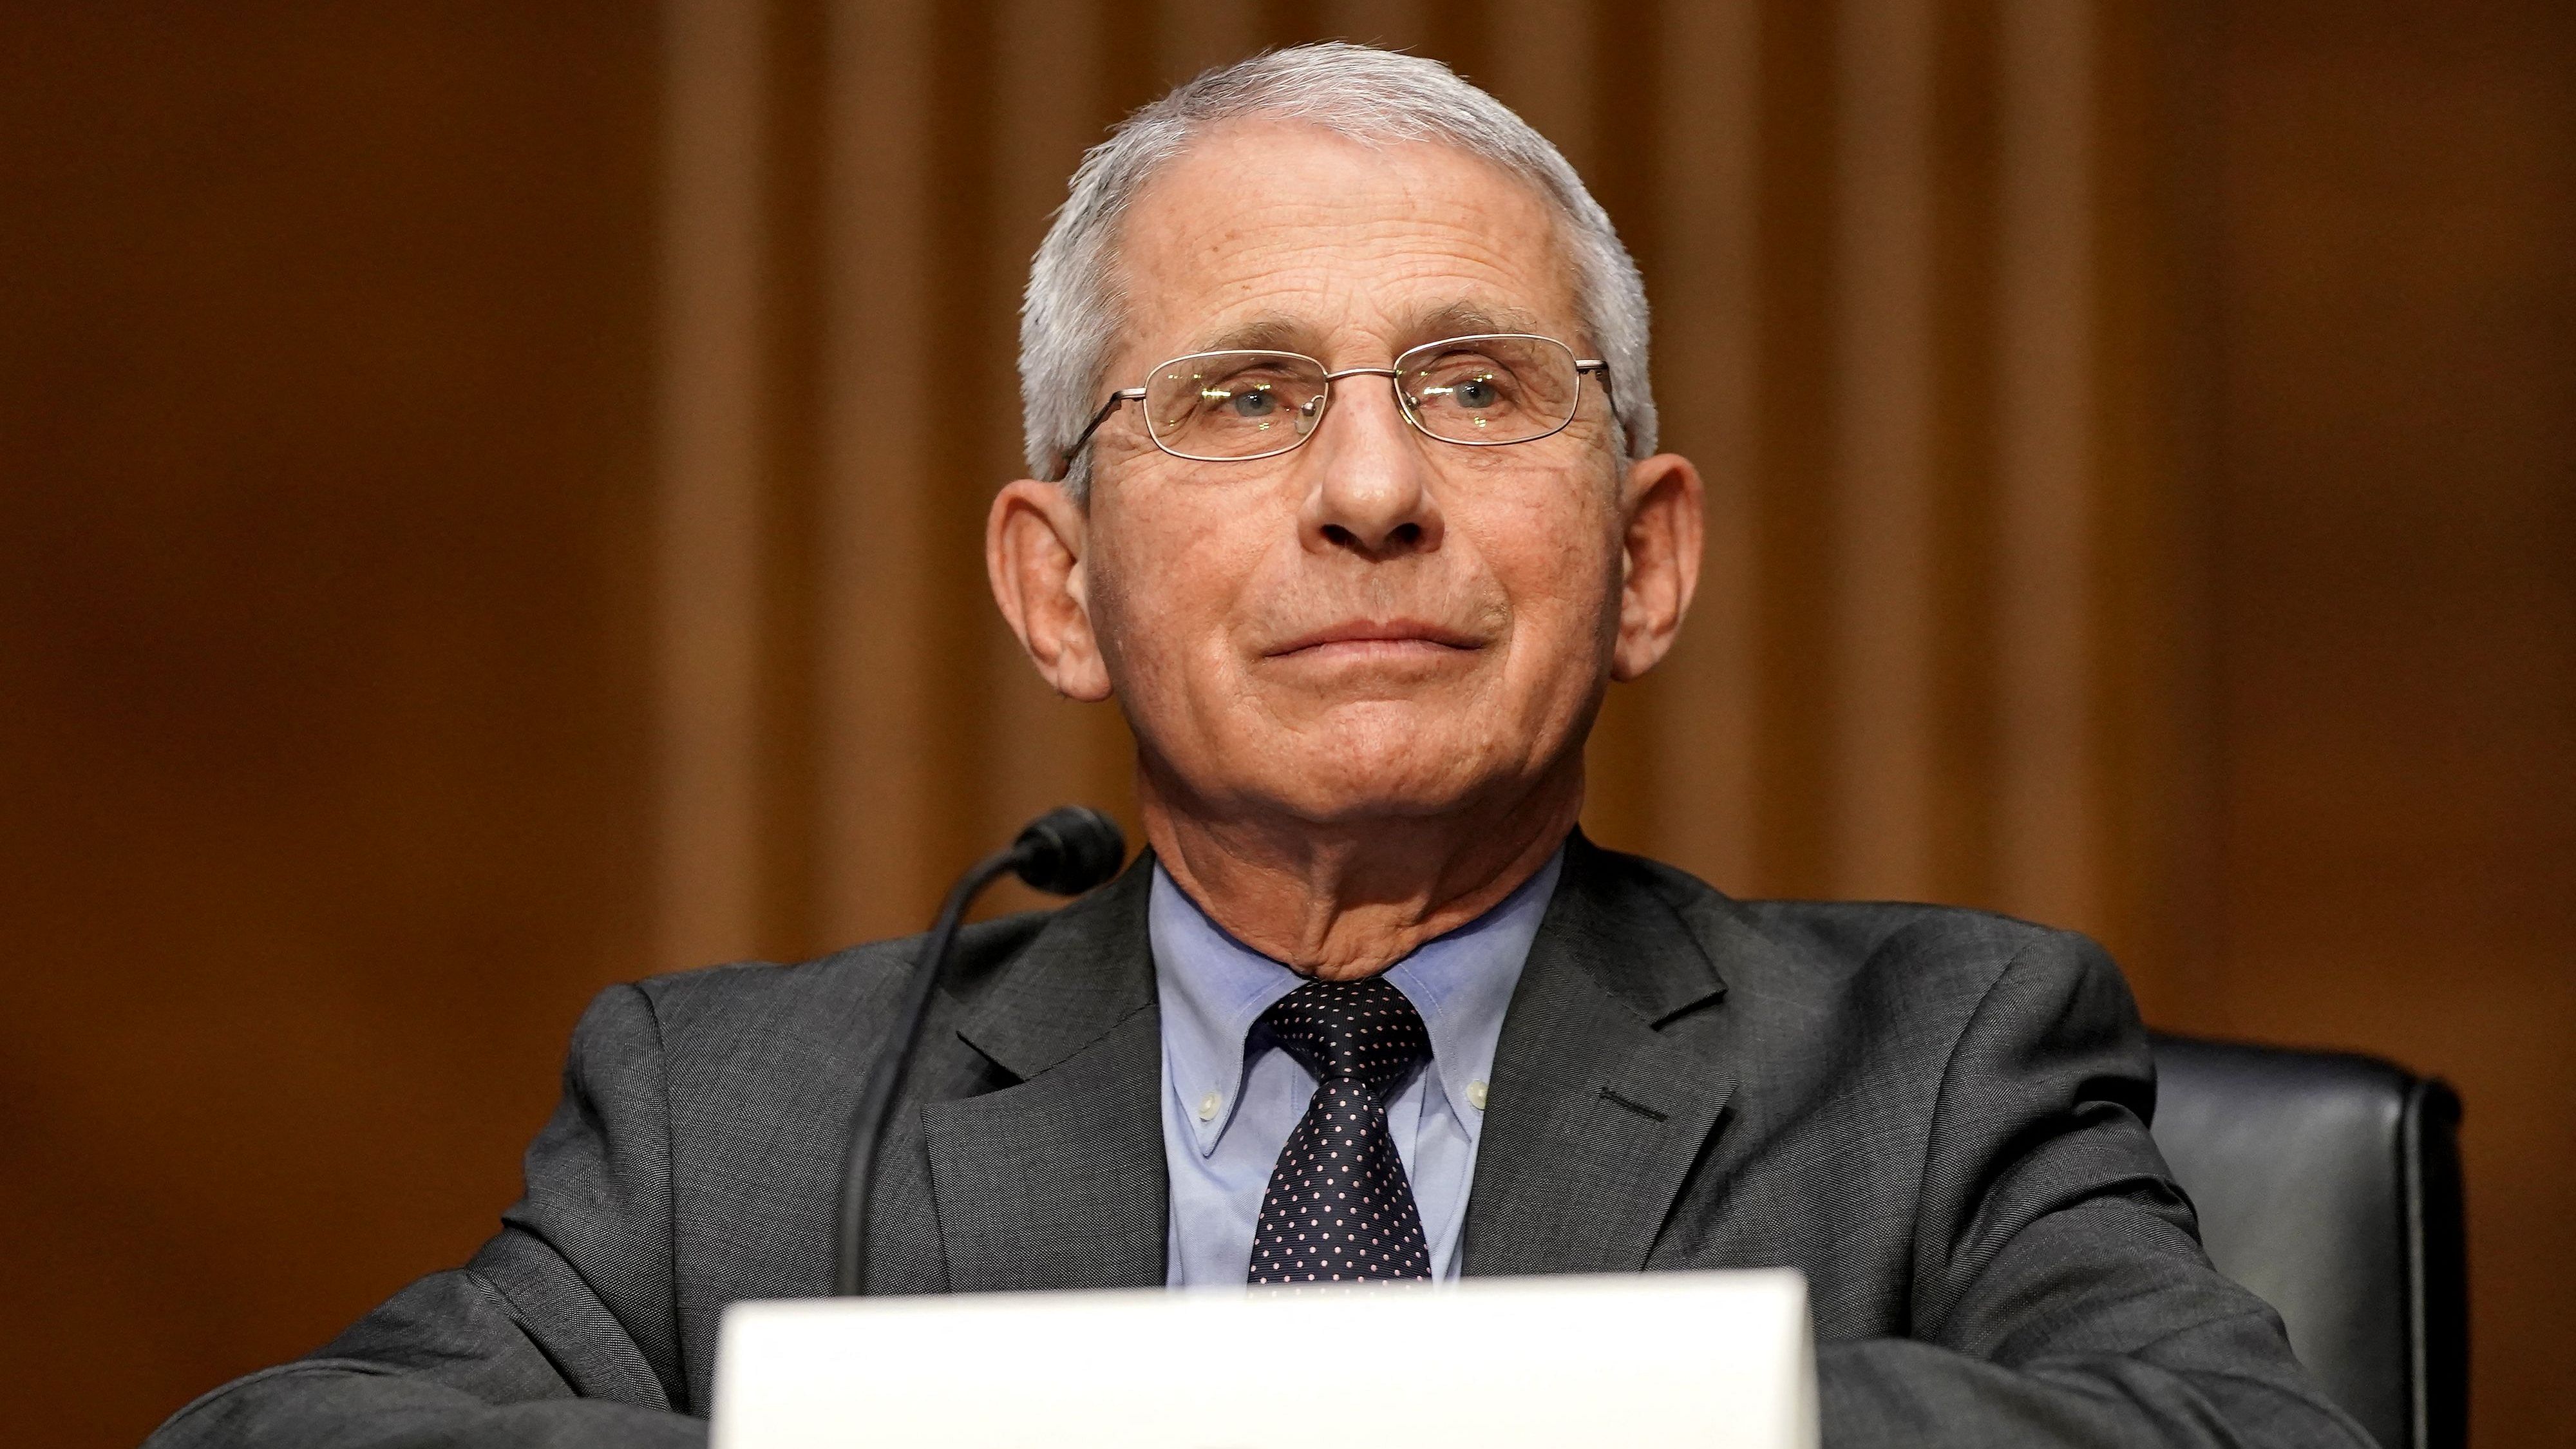 Chief medical adviser to the White House, Dr Anthony Fauci. Credit: AFP Photo